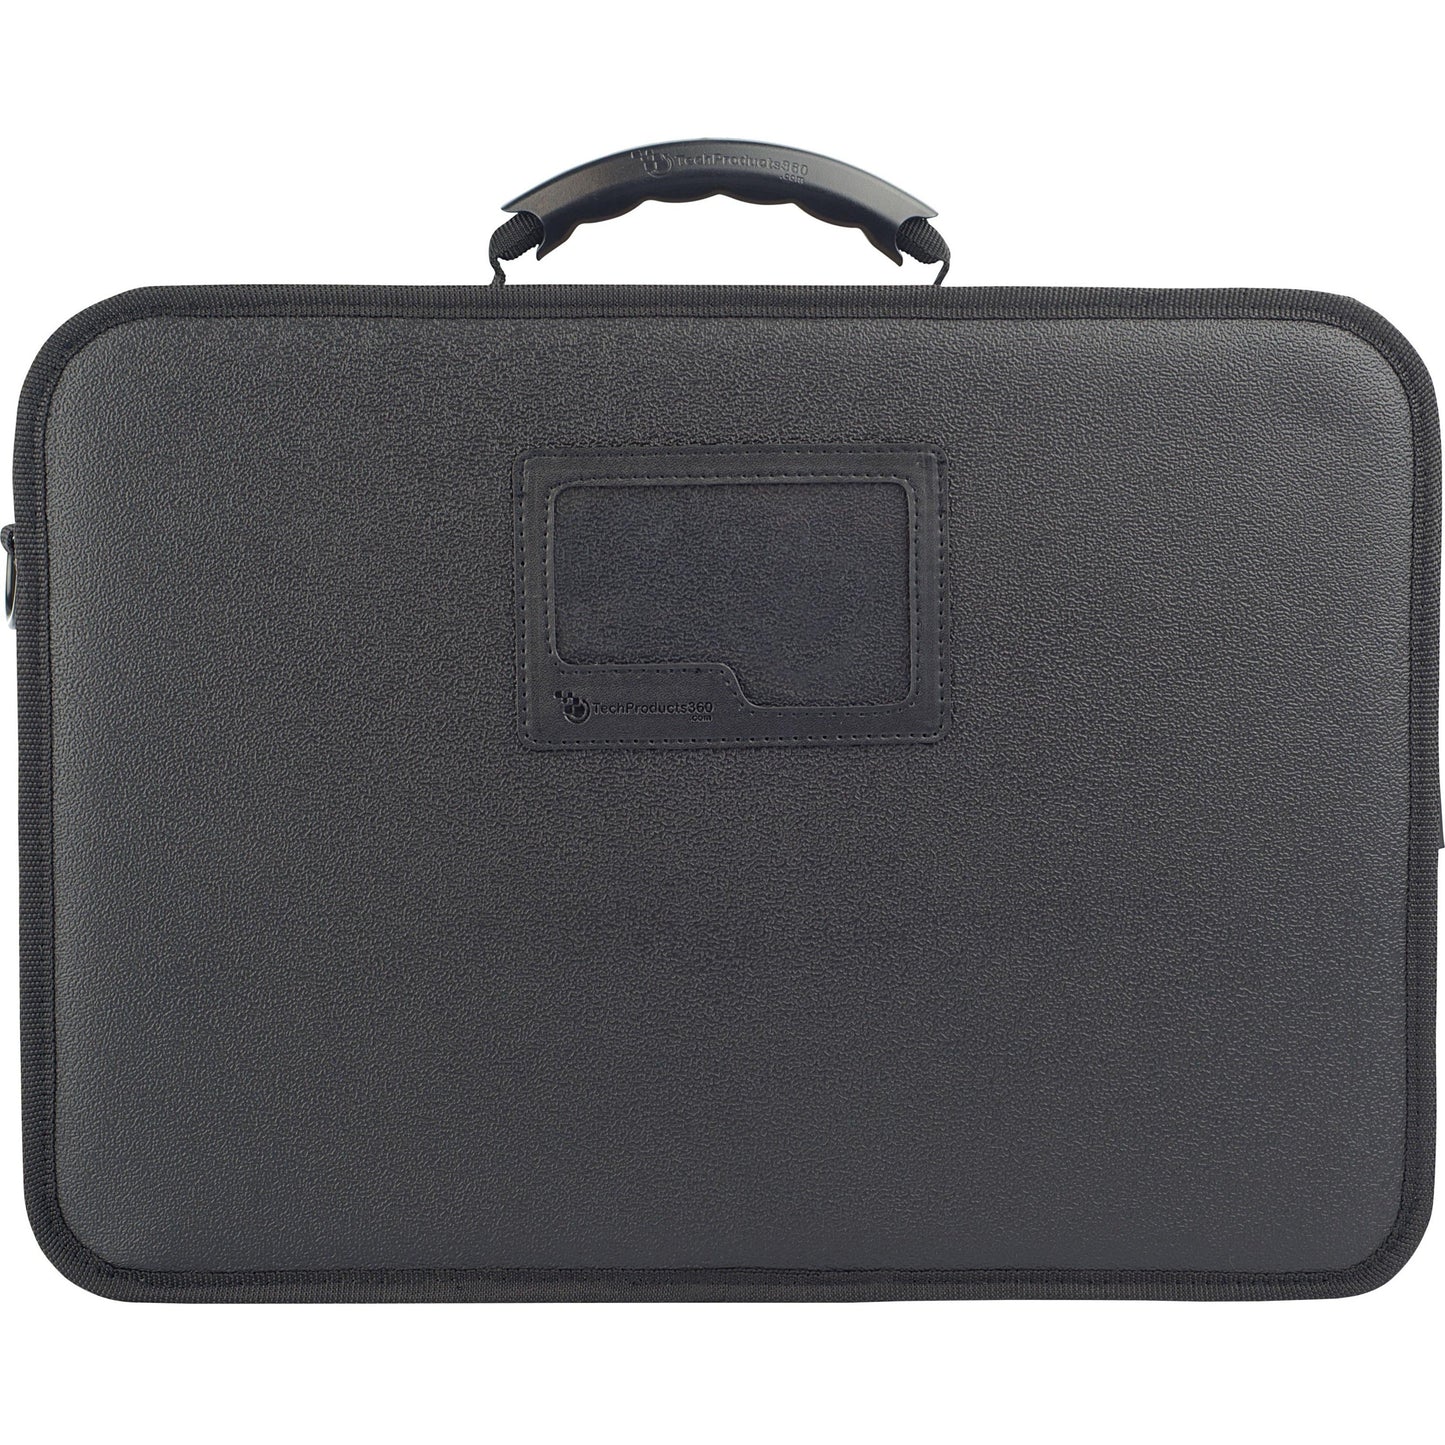 TechProducts360 Work-In Vault Carrying Case for 11" Netbook - Khaki